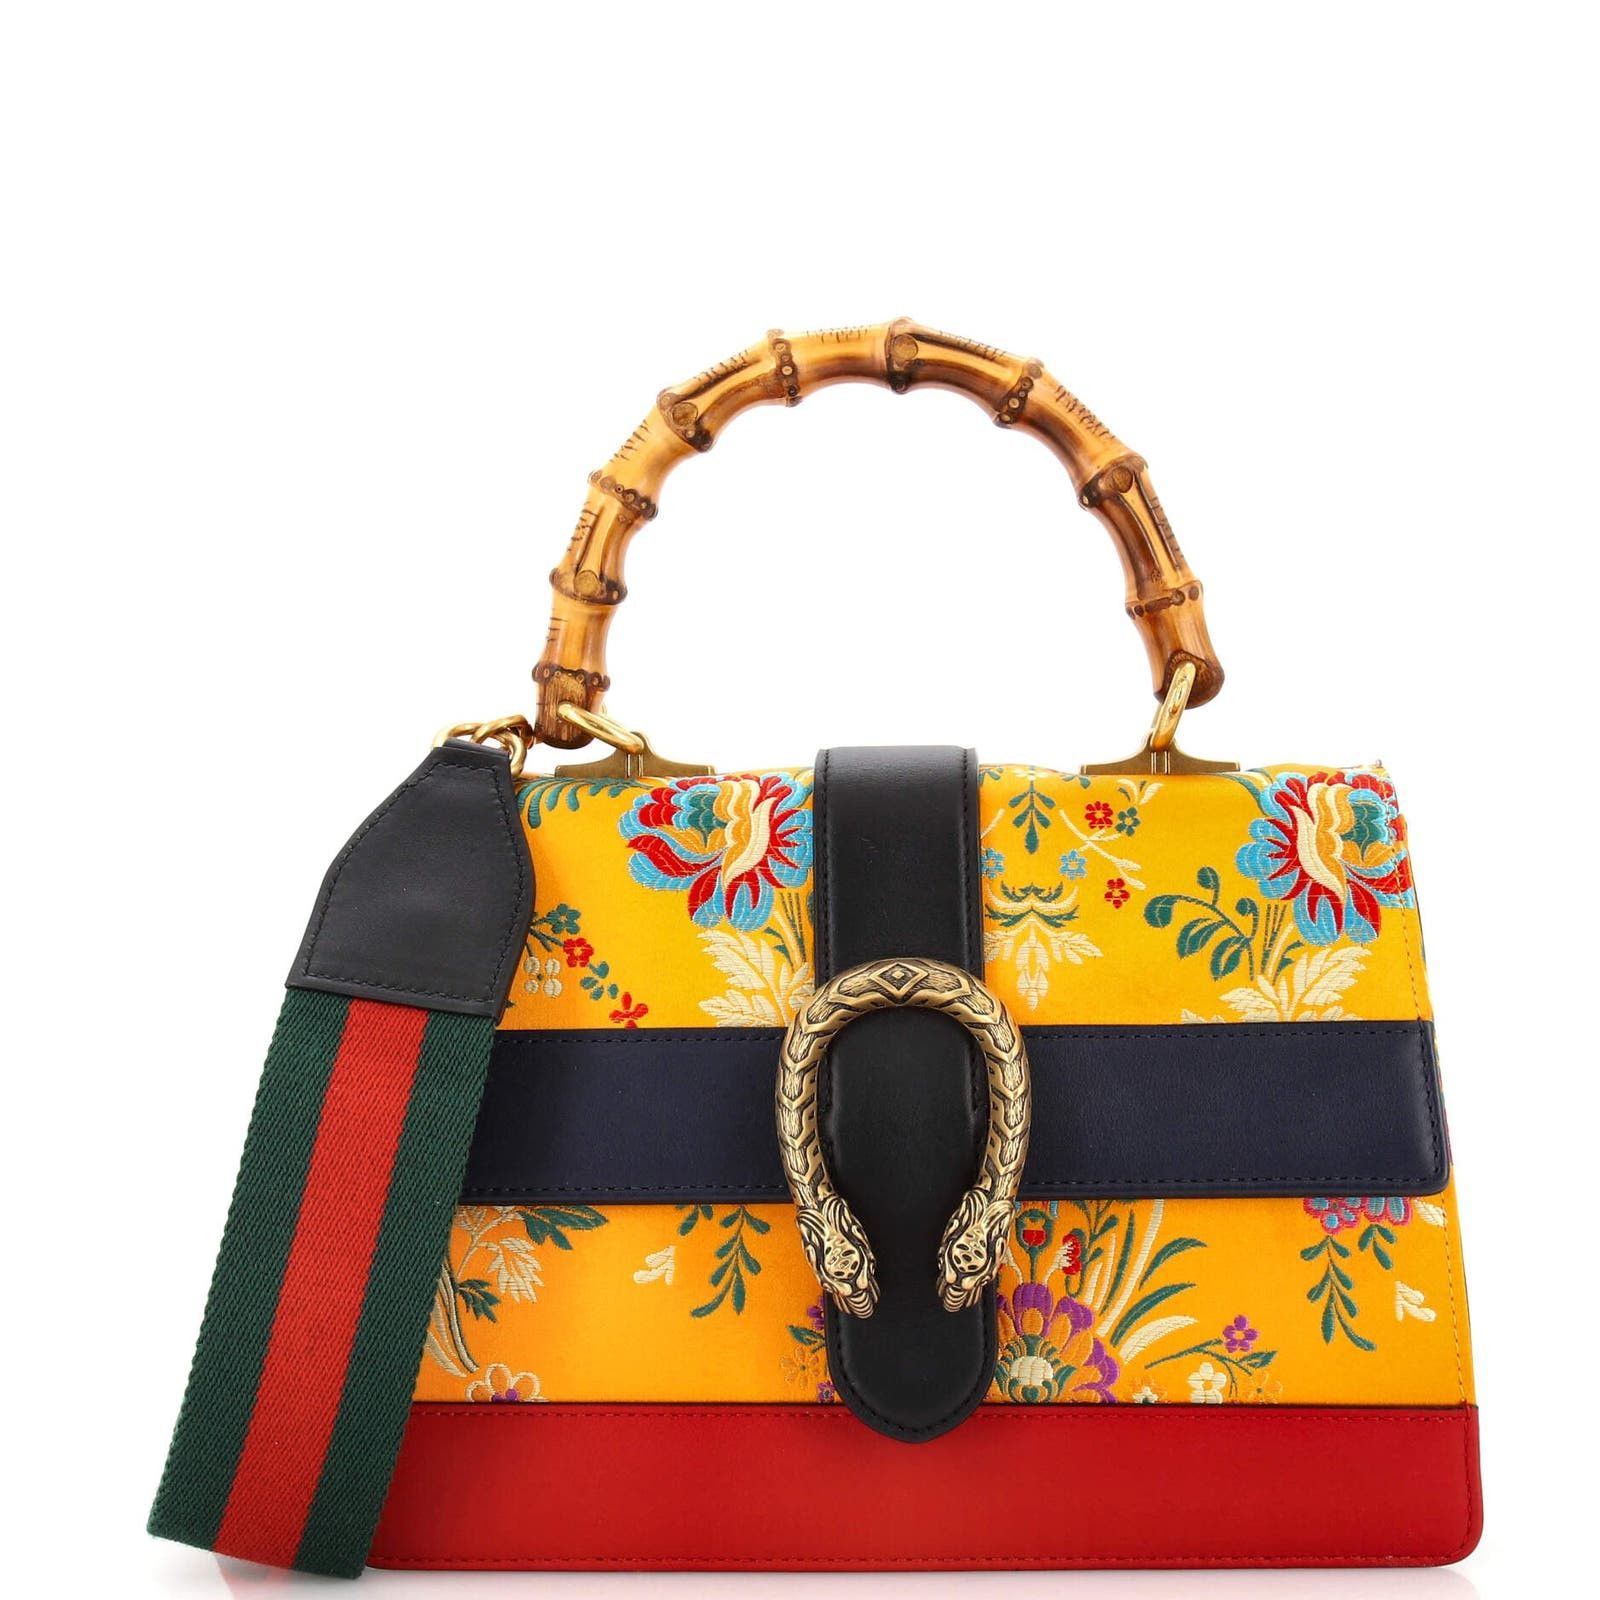 Gucci Dionysus Bamboo Top Handle Bag Floral Jacquard with Leather Size ONE SIZE - 1 Preview